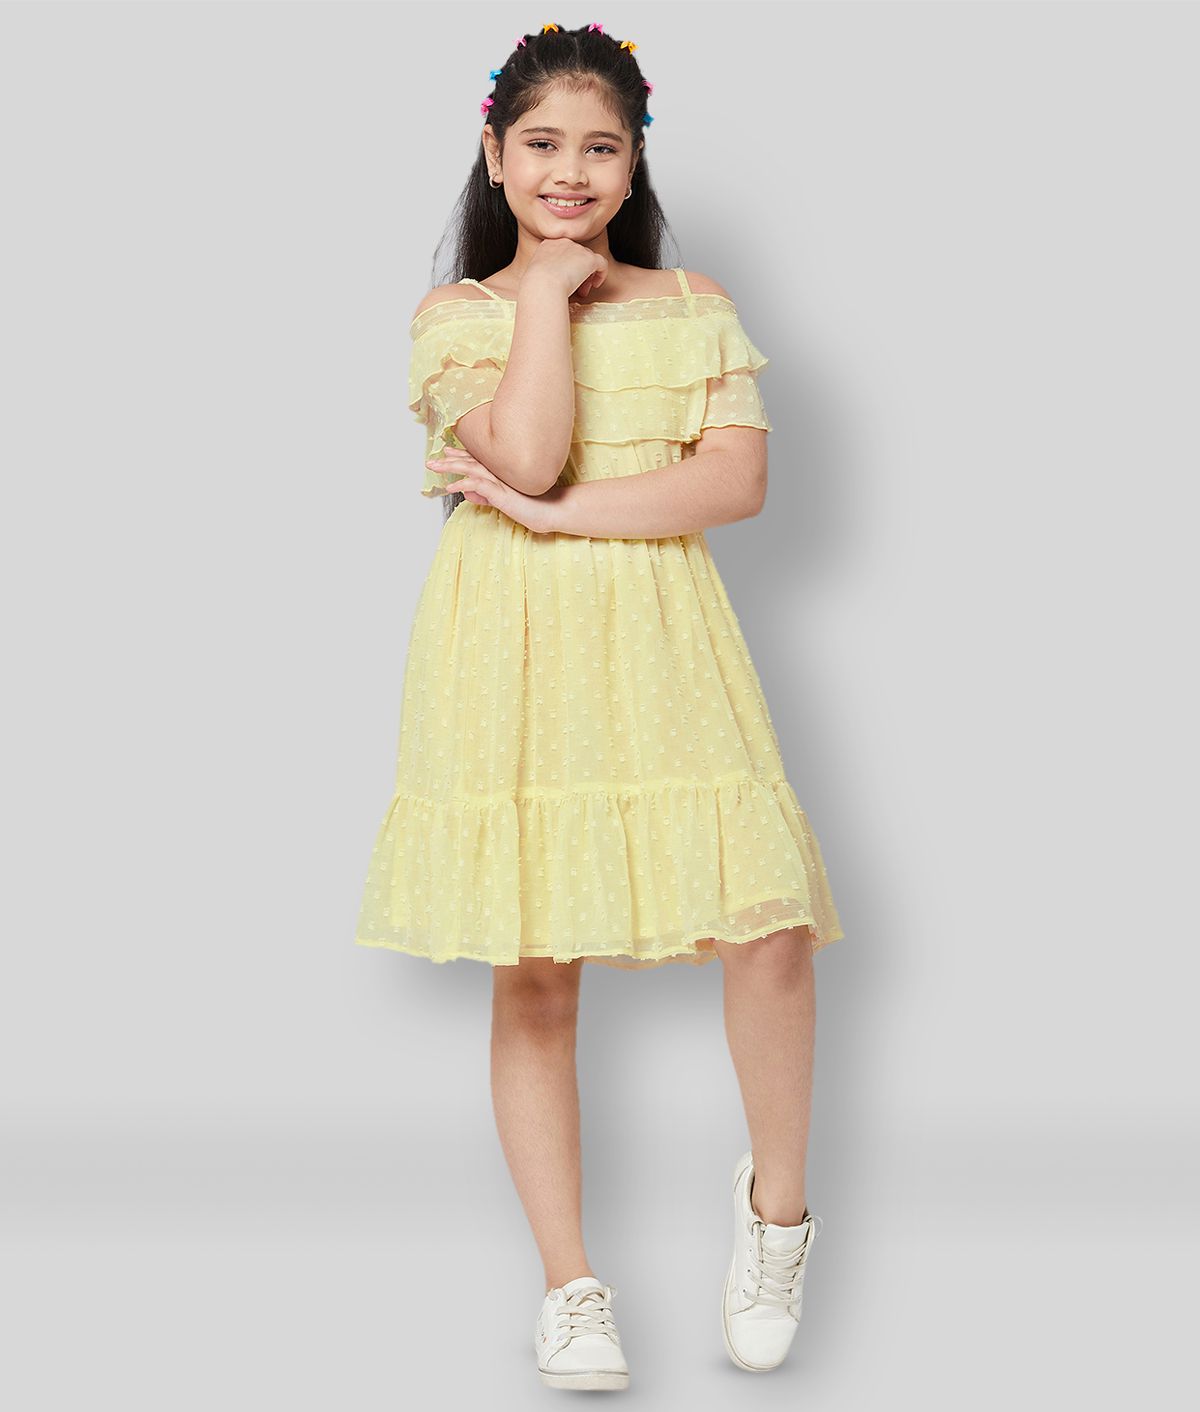 Stylo Bug - Yellow Polyester Girl's A-line Dress ( Pack of 1 )